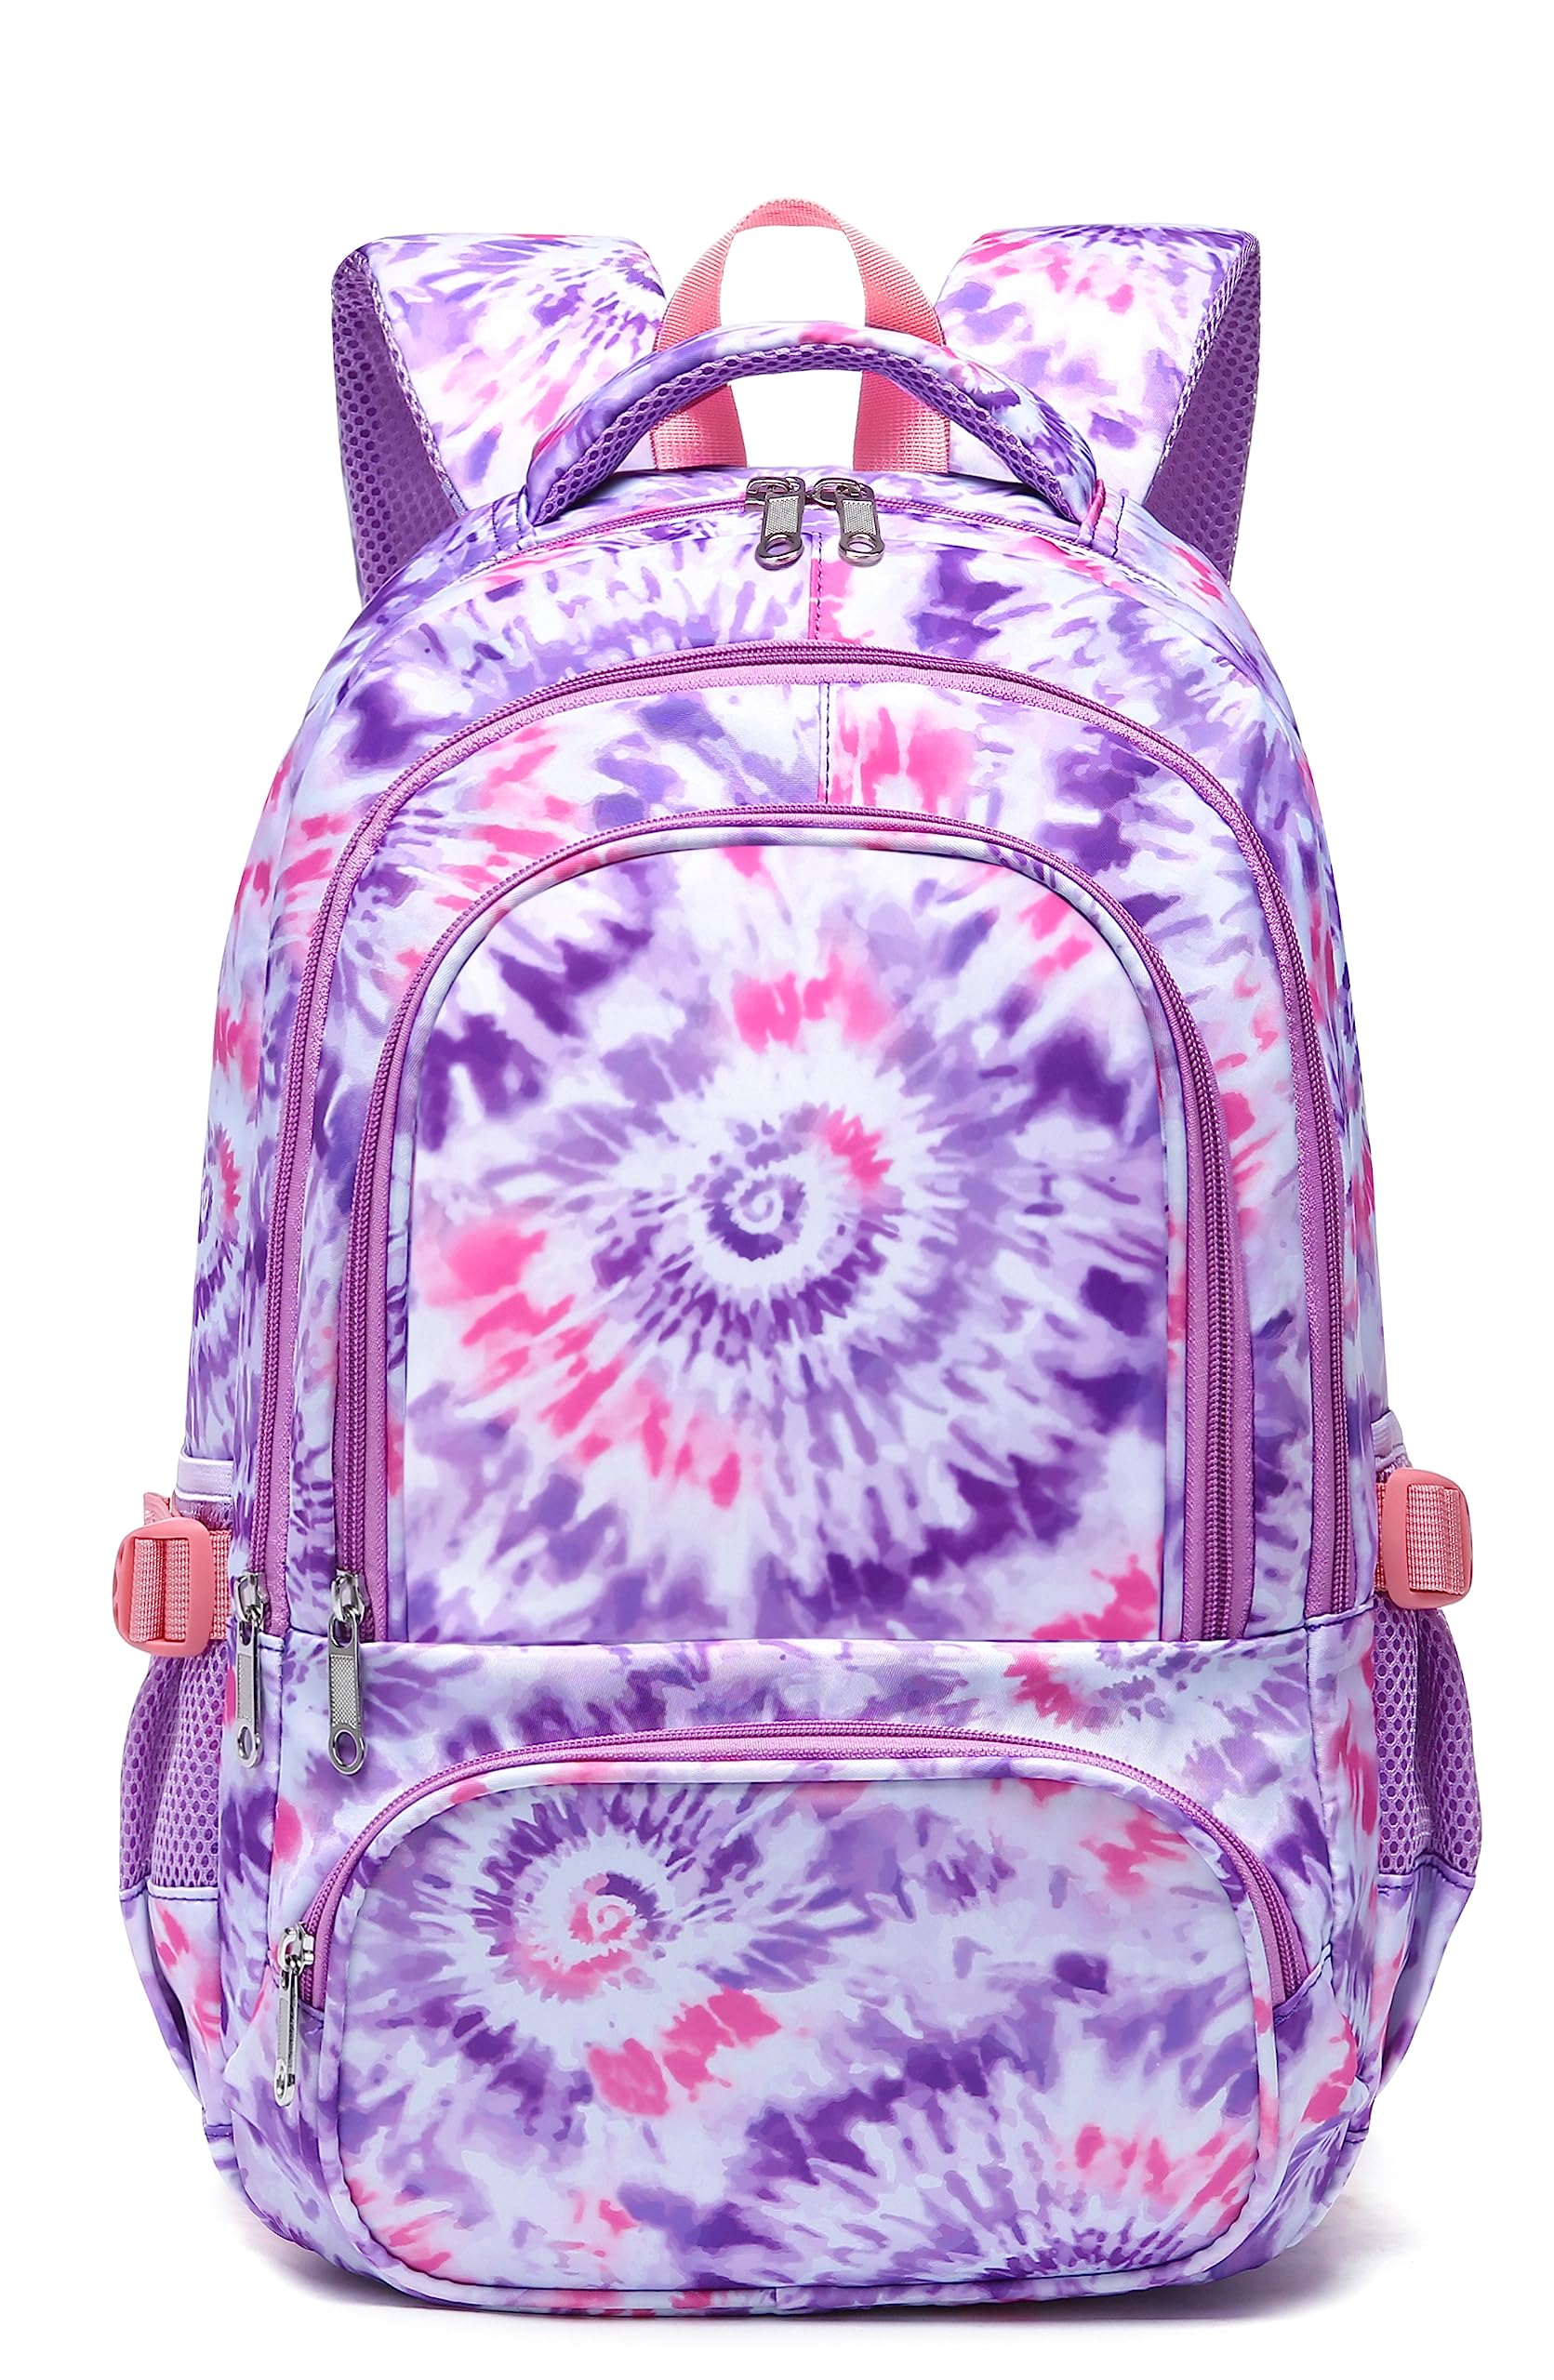 BLUEFAIRY Kids Backpack for Girls Elementary Primary Middle School Bags for Teens Childs Tie Dye Bookbags Cute Durable Travel Gifts Morrales Mochilas para Niñas de 4 5 6 7 8 9 Nños 17 Inch (Purple)